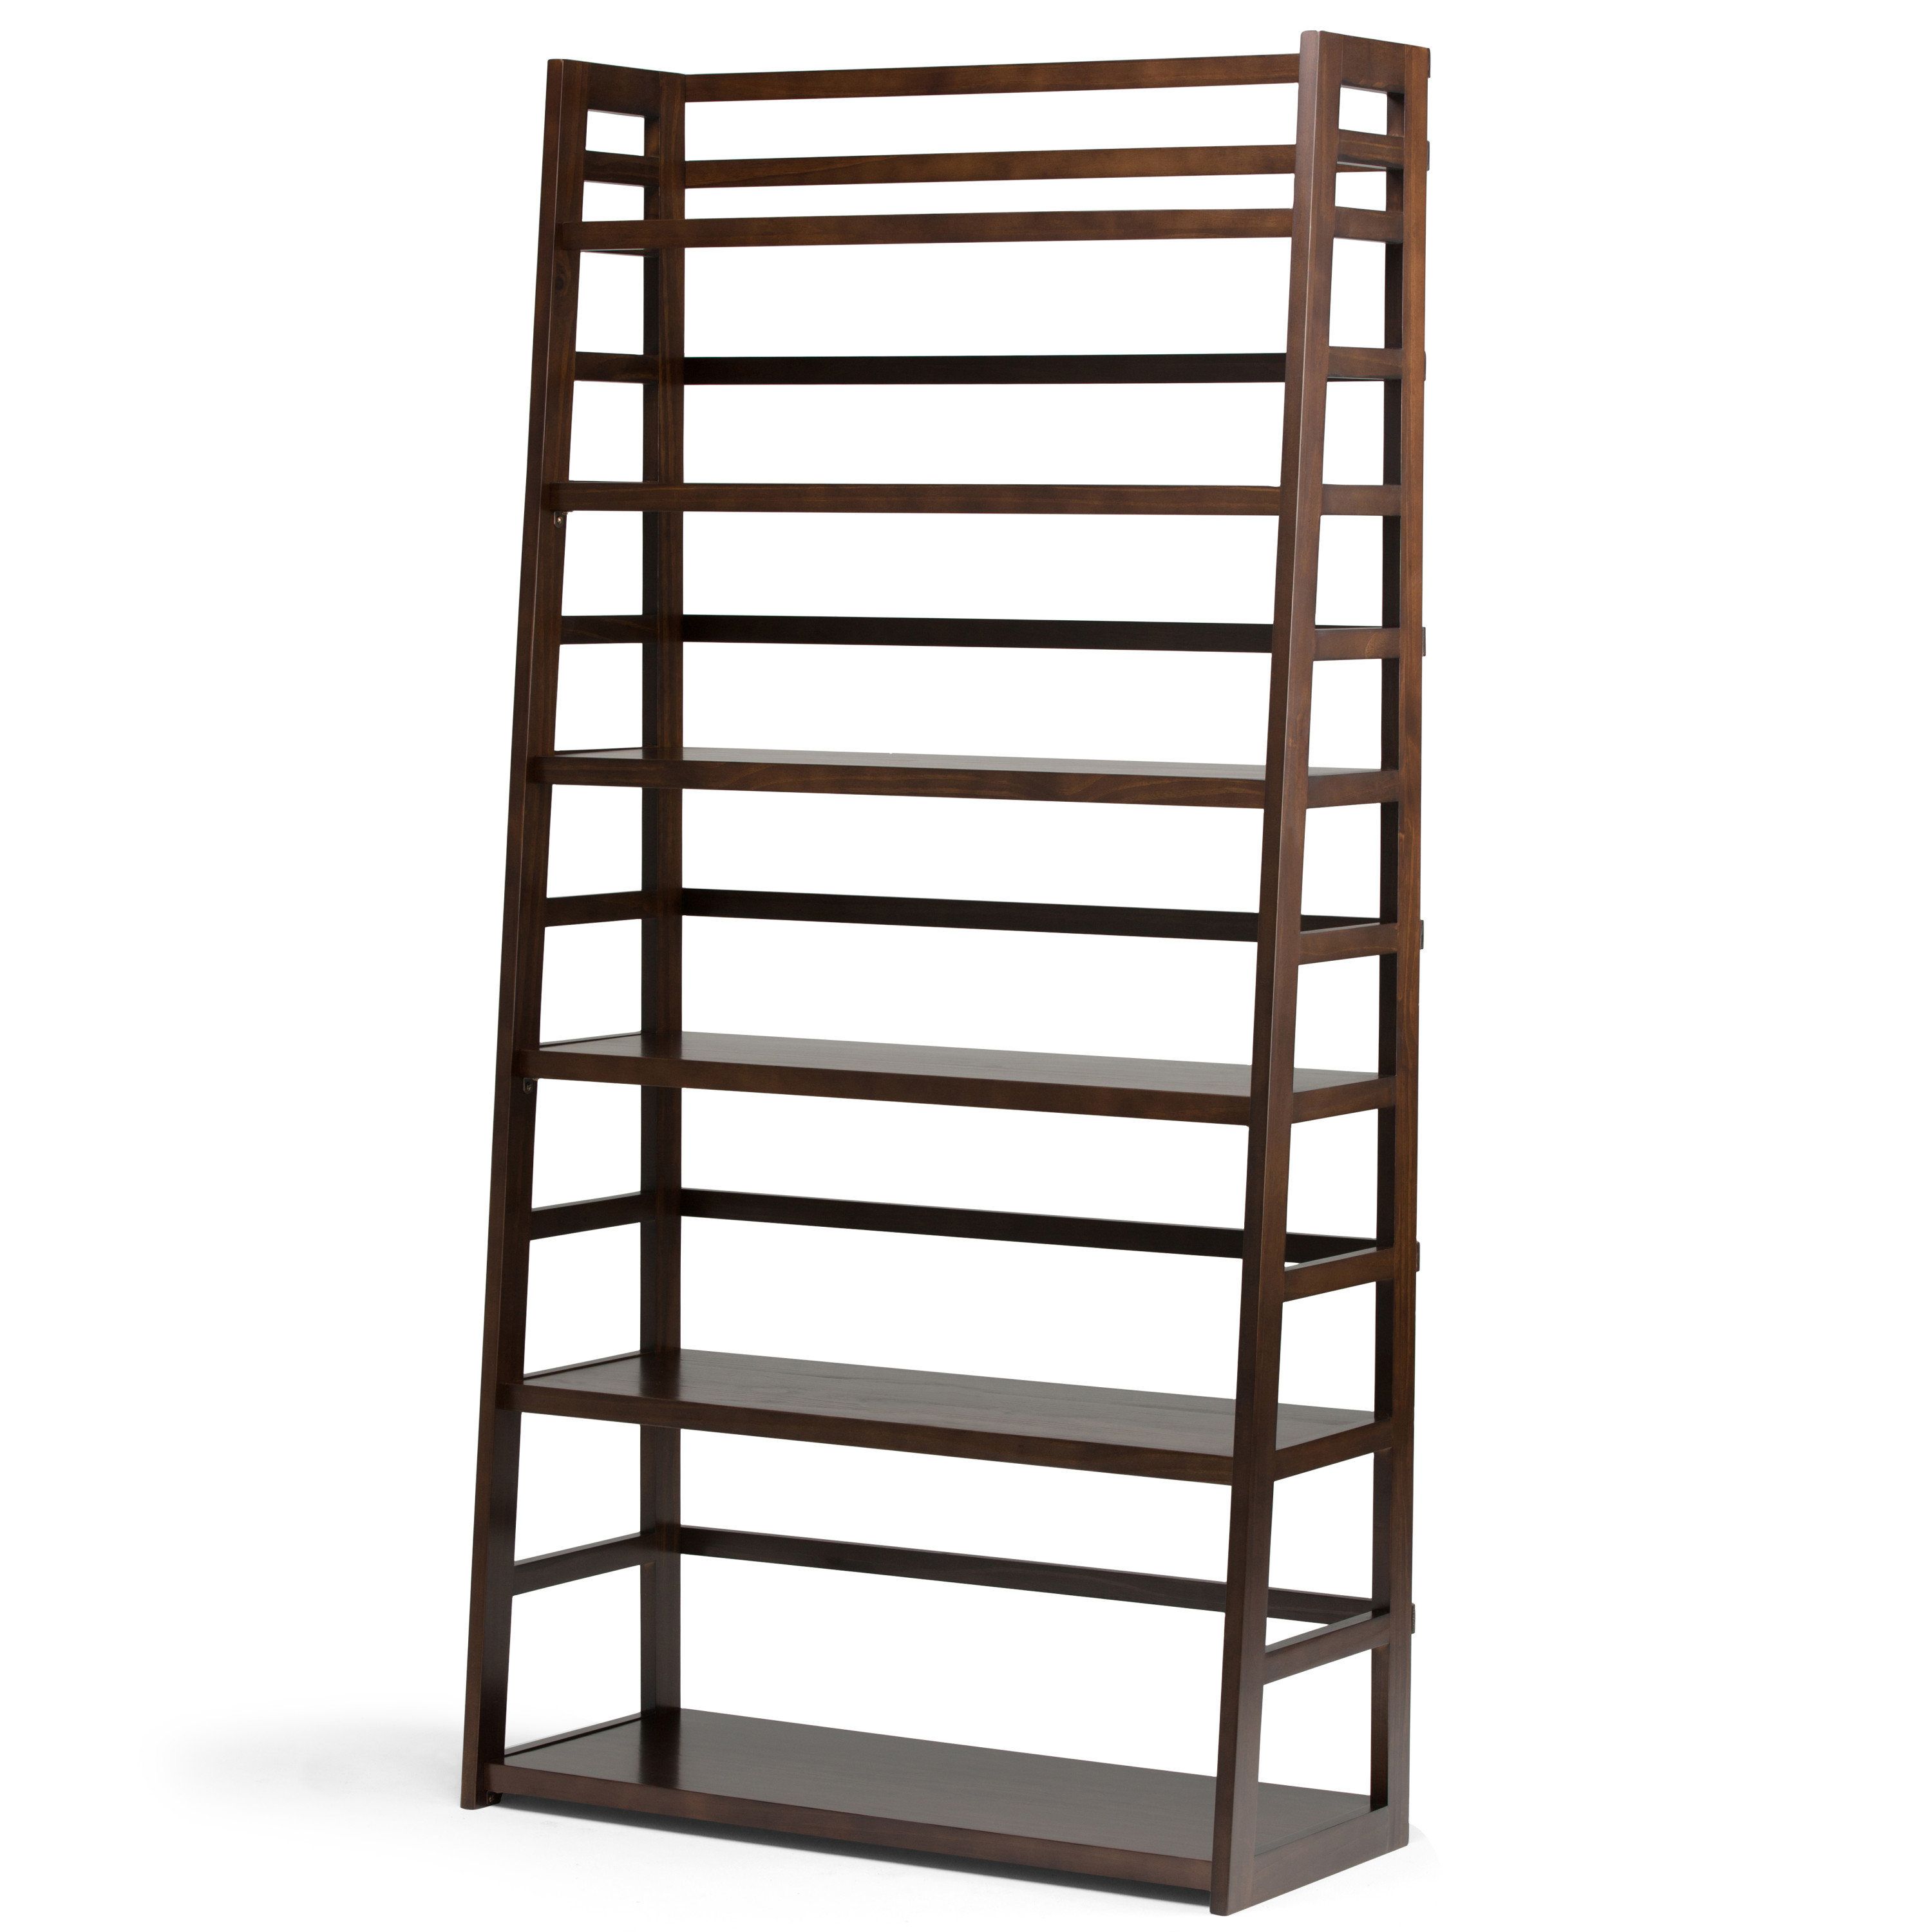 Mayna Ladder Bookcases In Latest Mayna Ladder Bookcase (View 1 of 20)